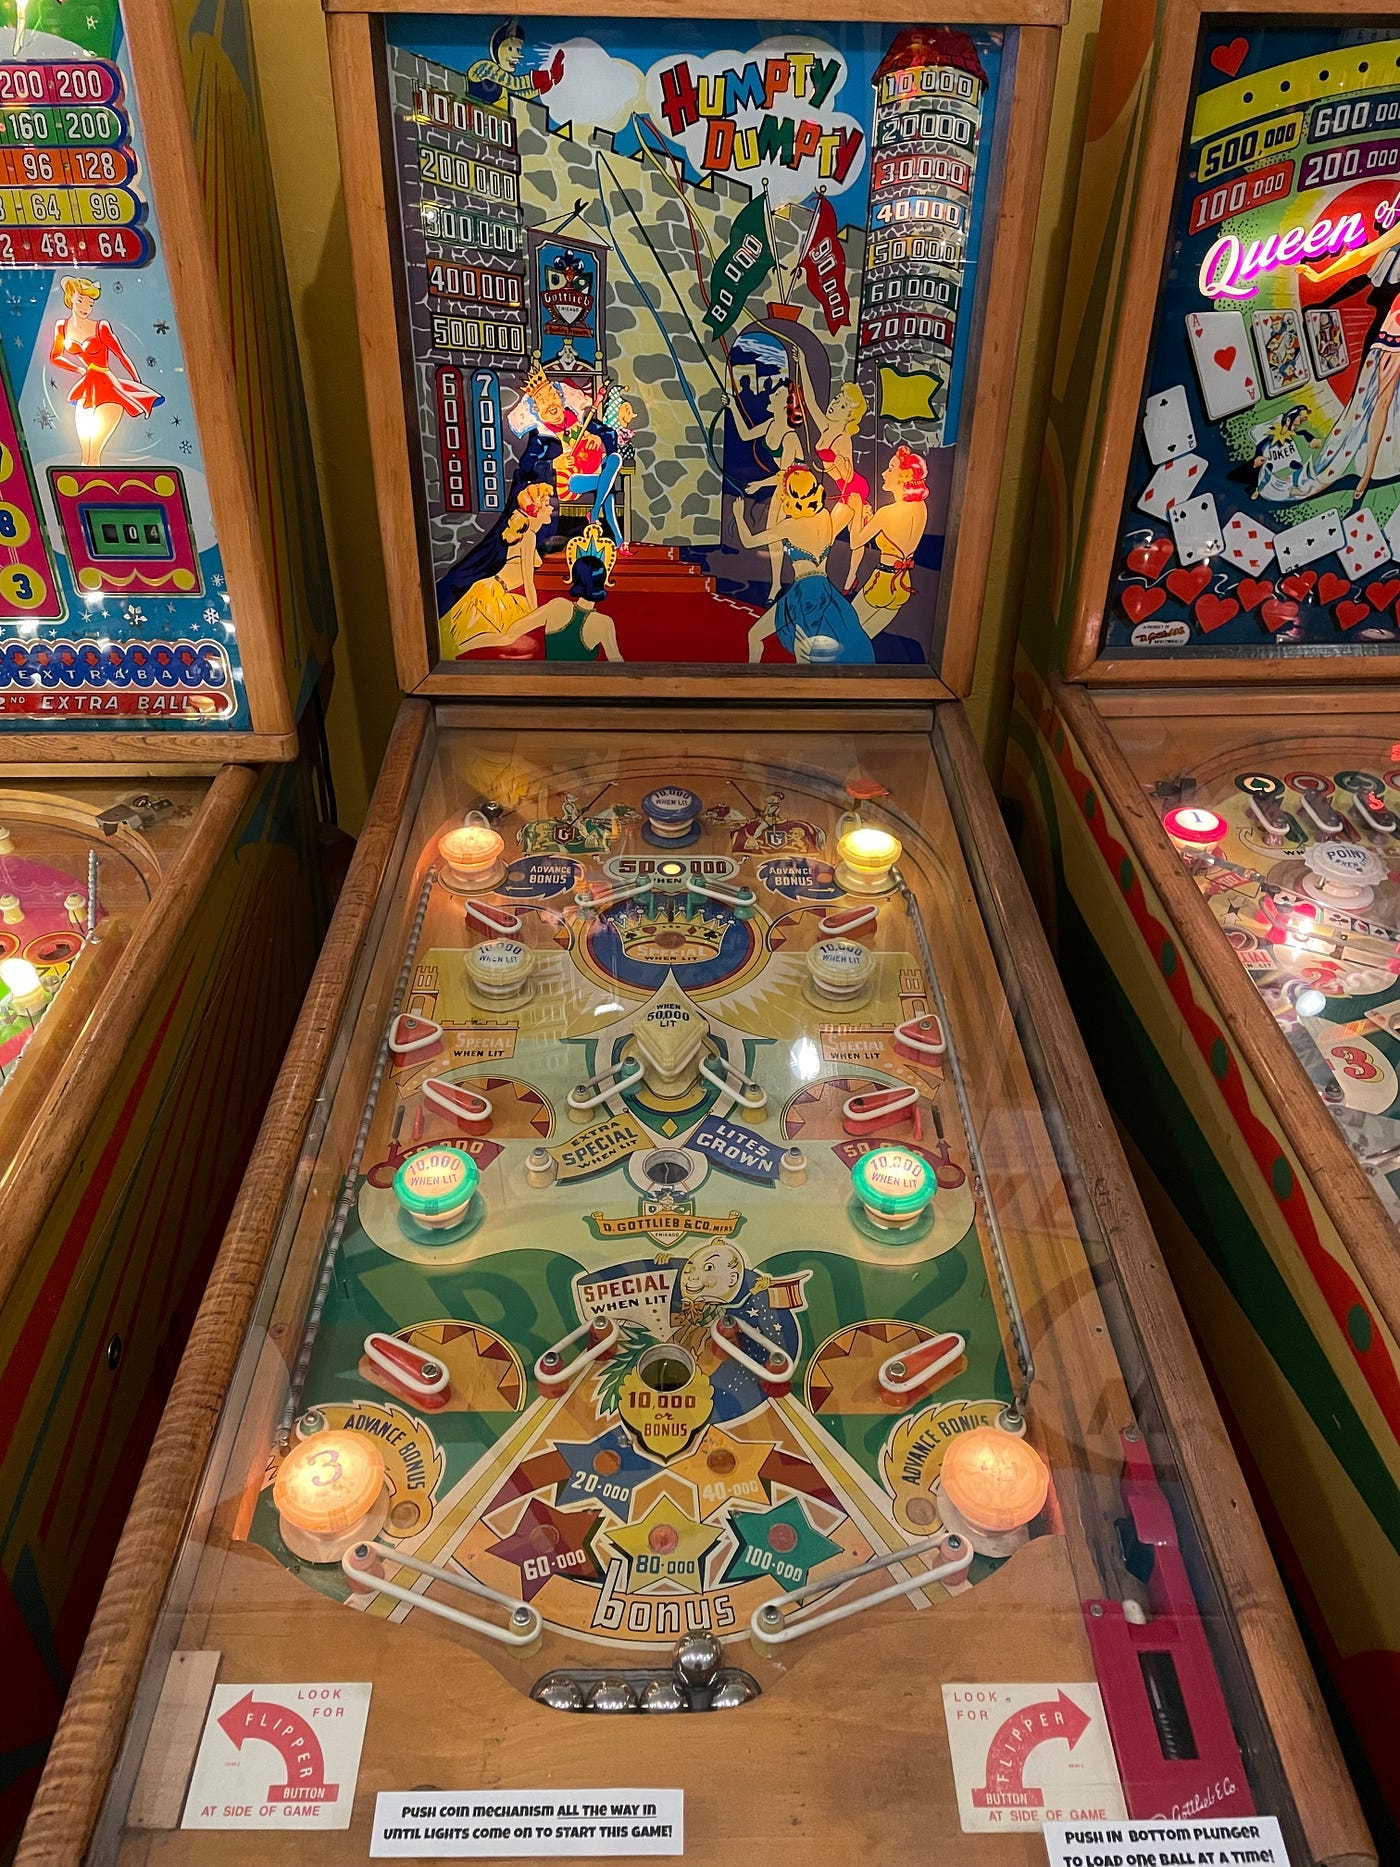 A pinball museum? There has to be a twist